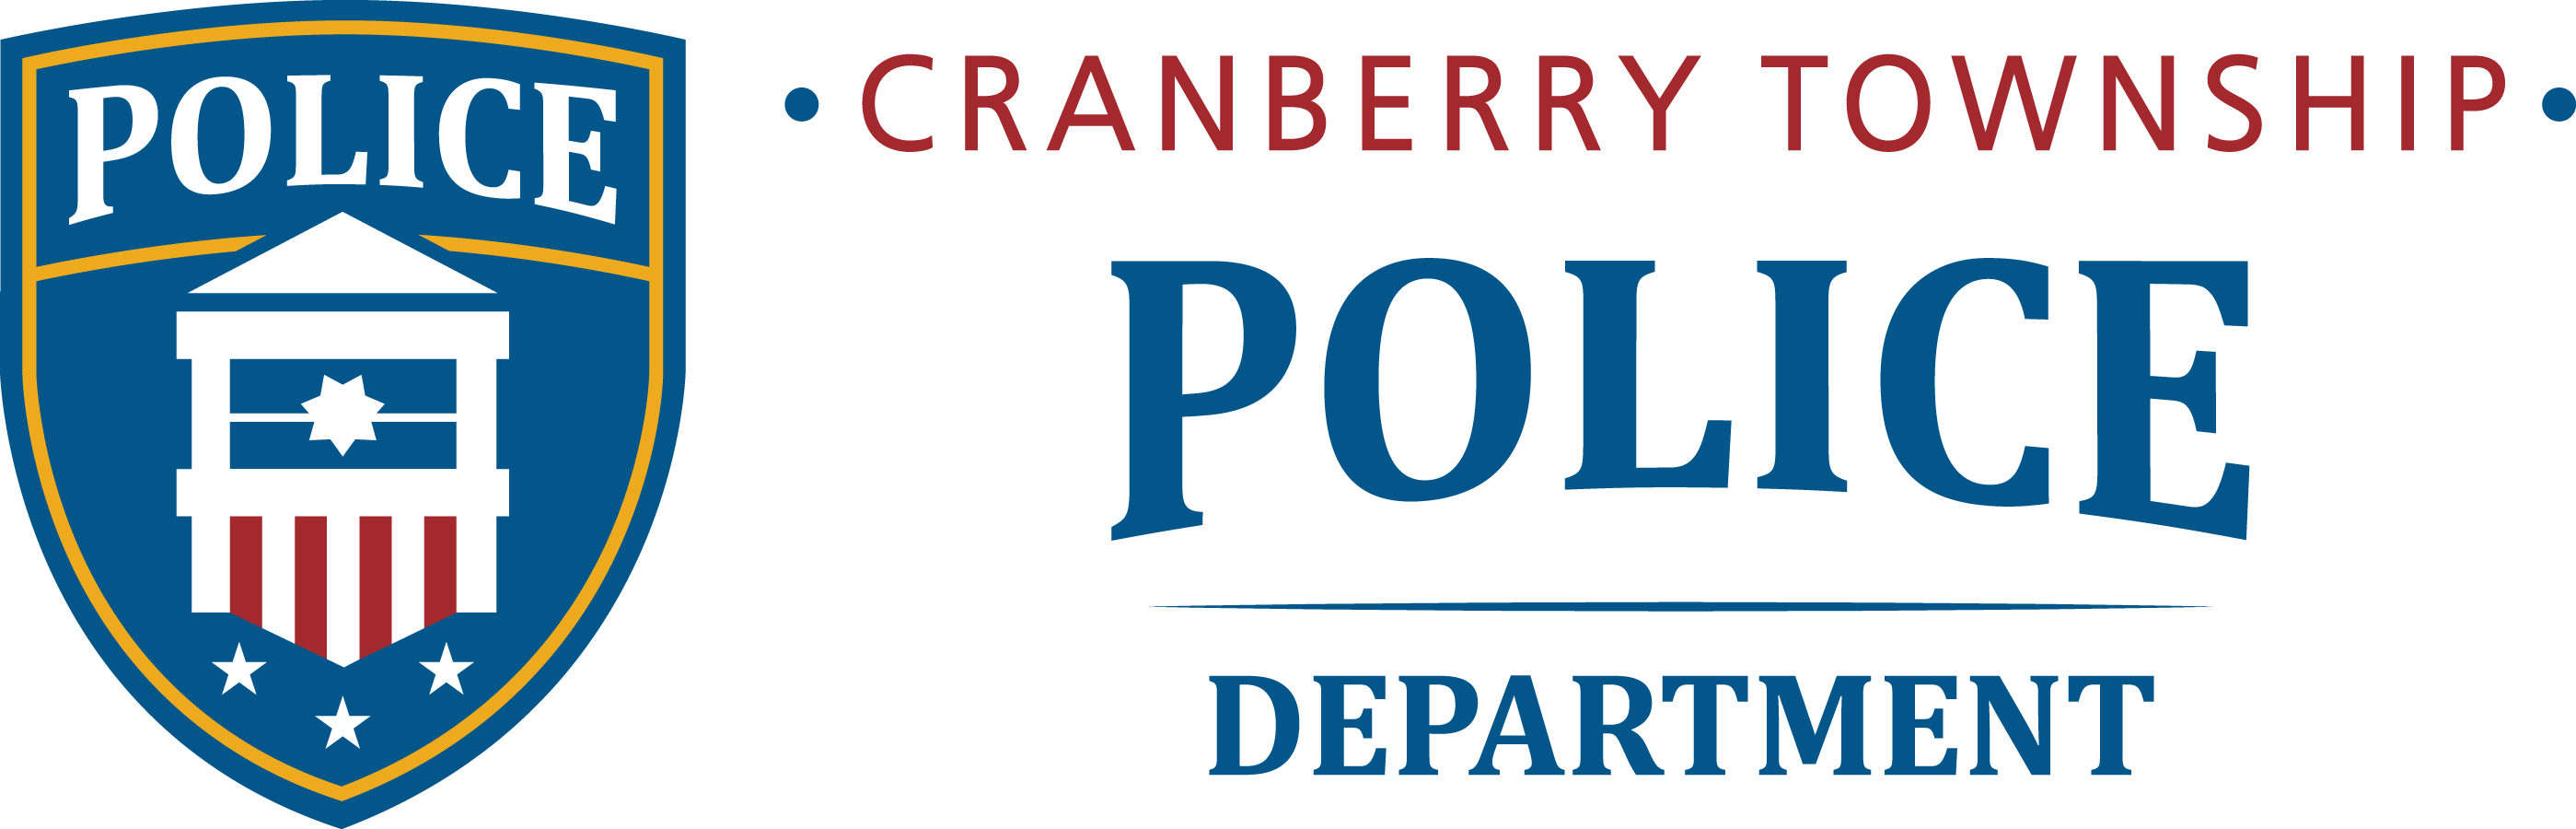 Cranberry Township Police Department, PA Police Jobs